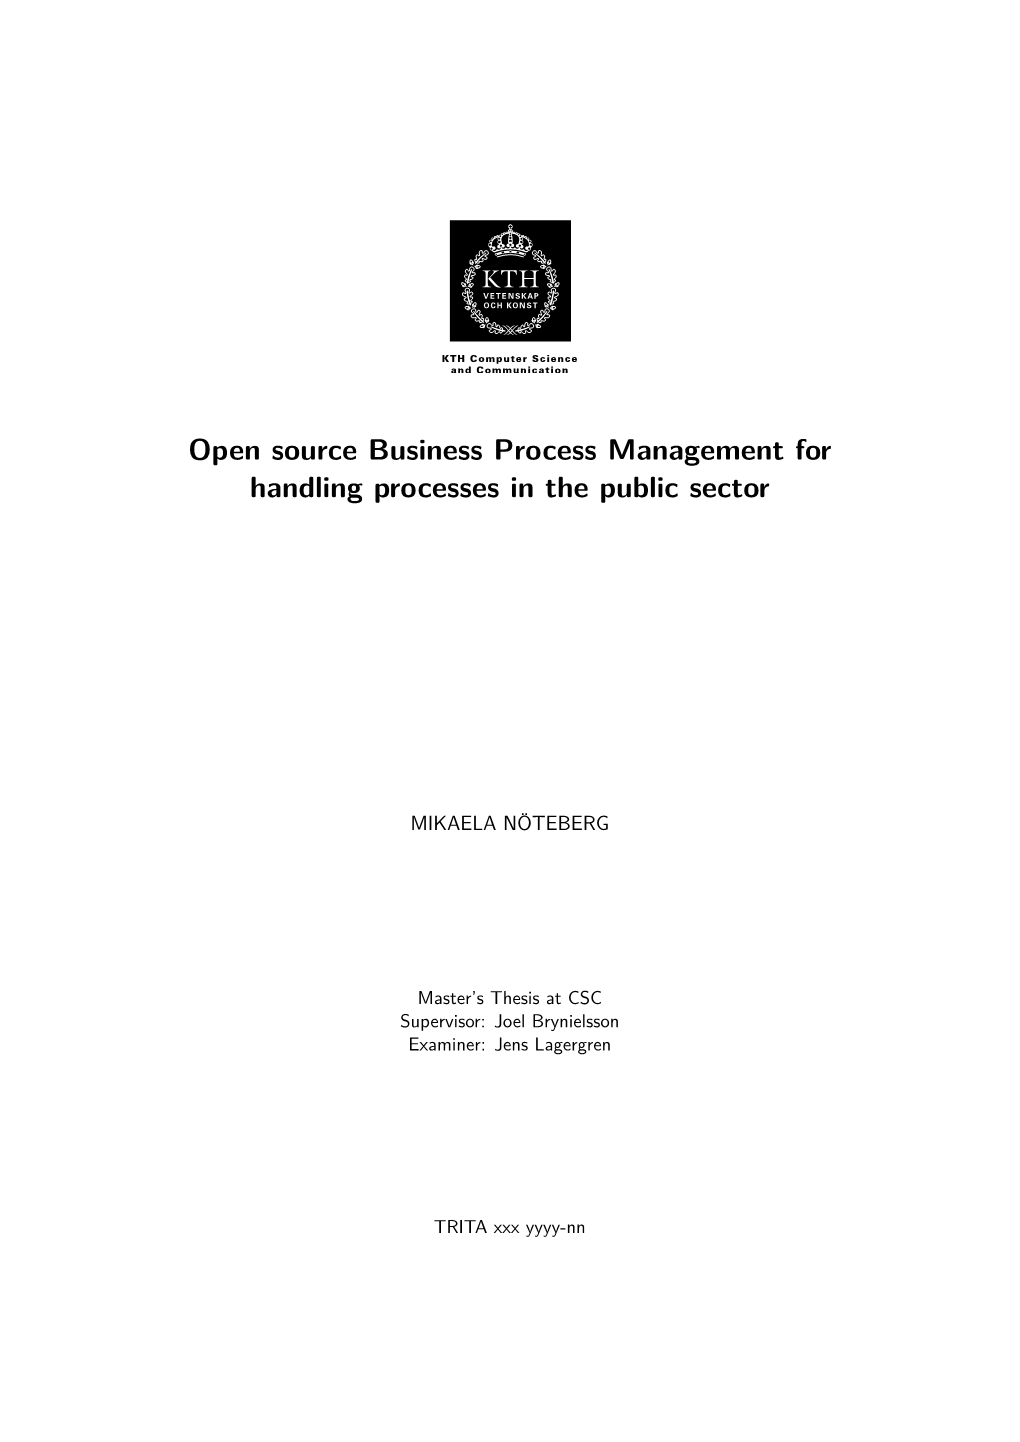 Open Source Business Process Management for Handling Processes in the Public Sector